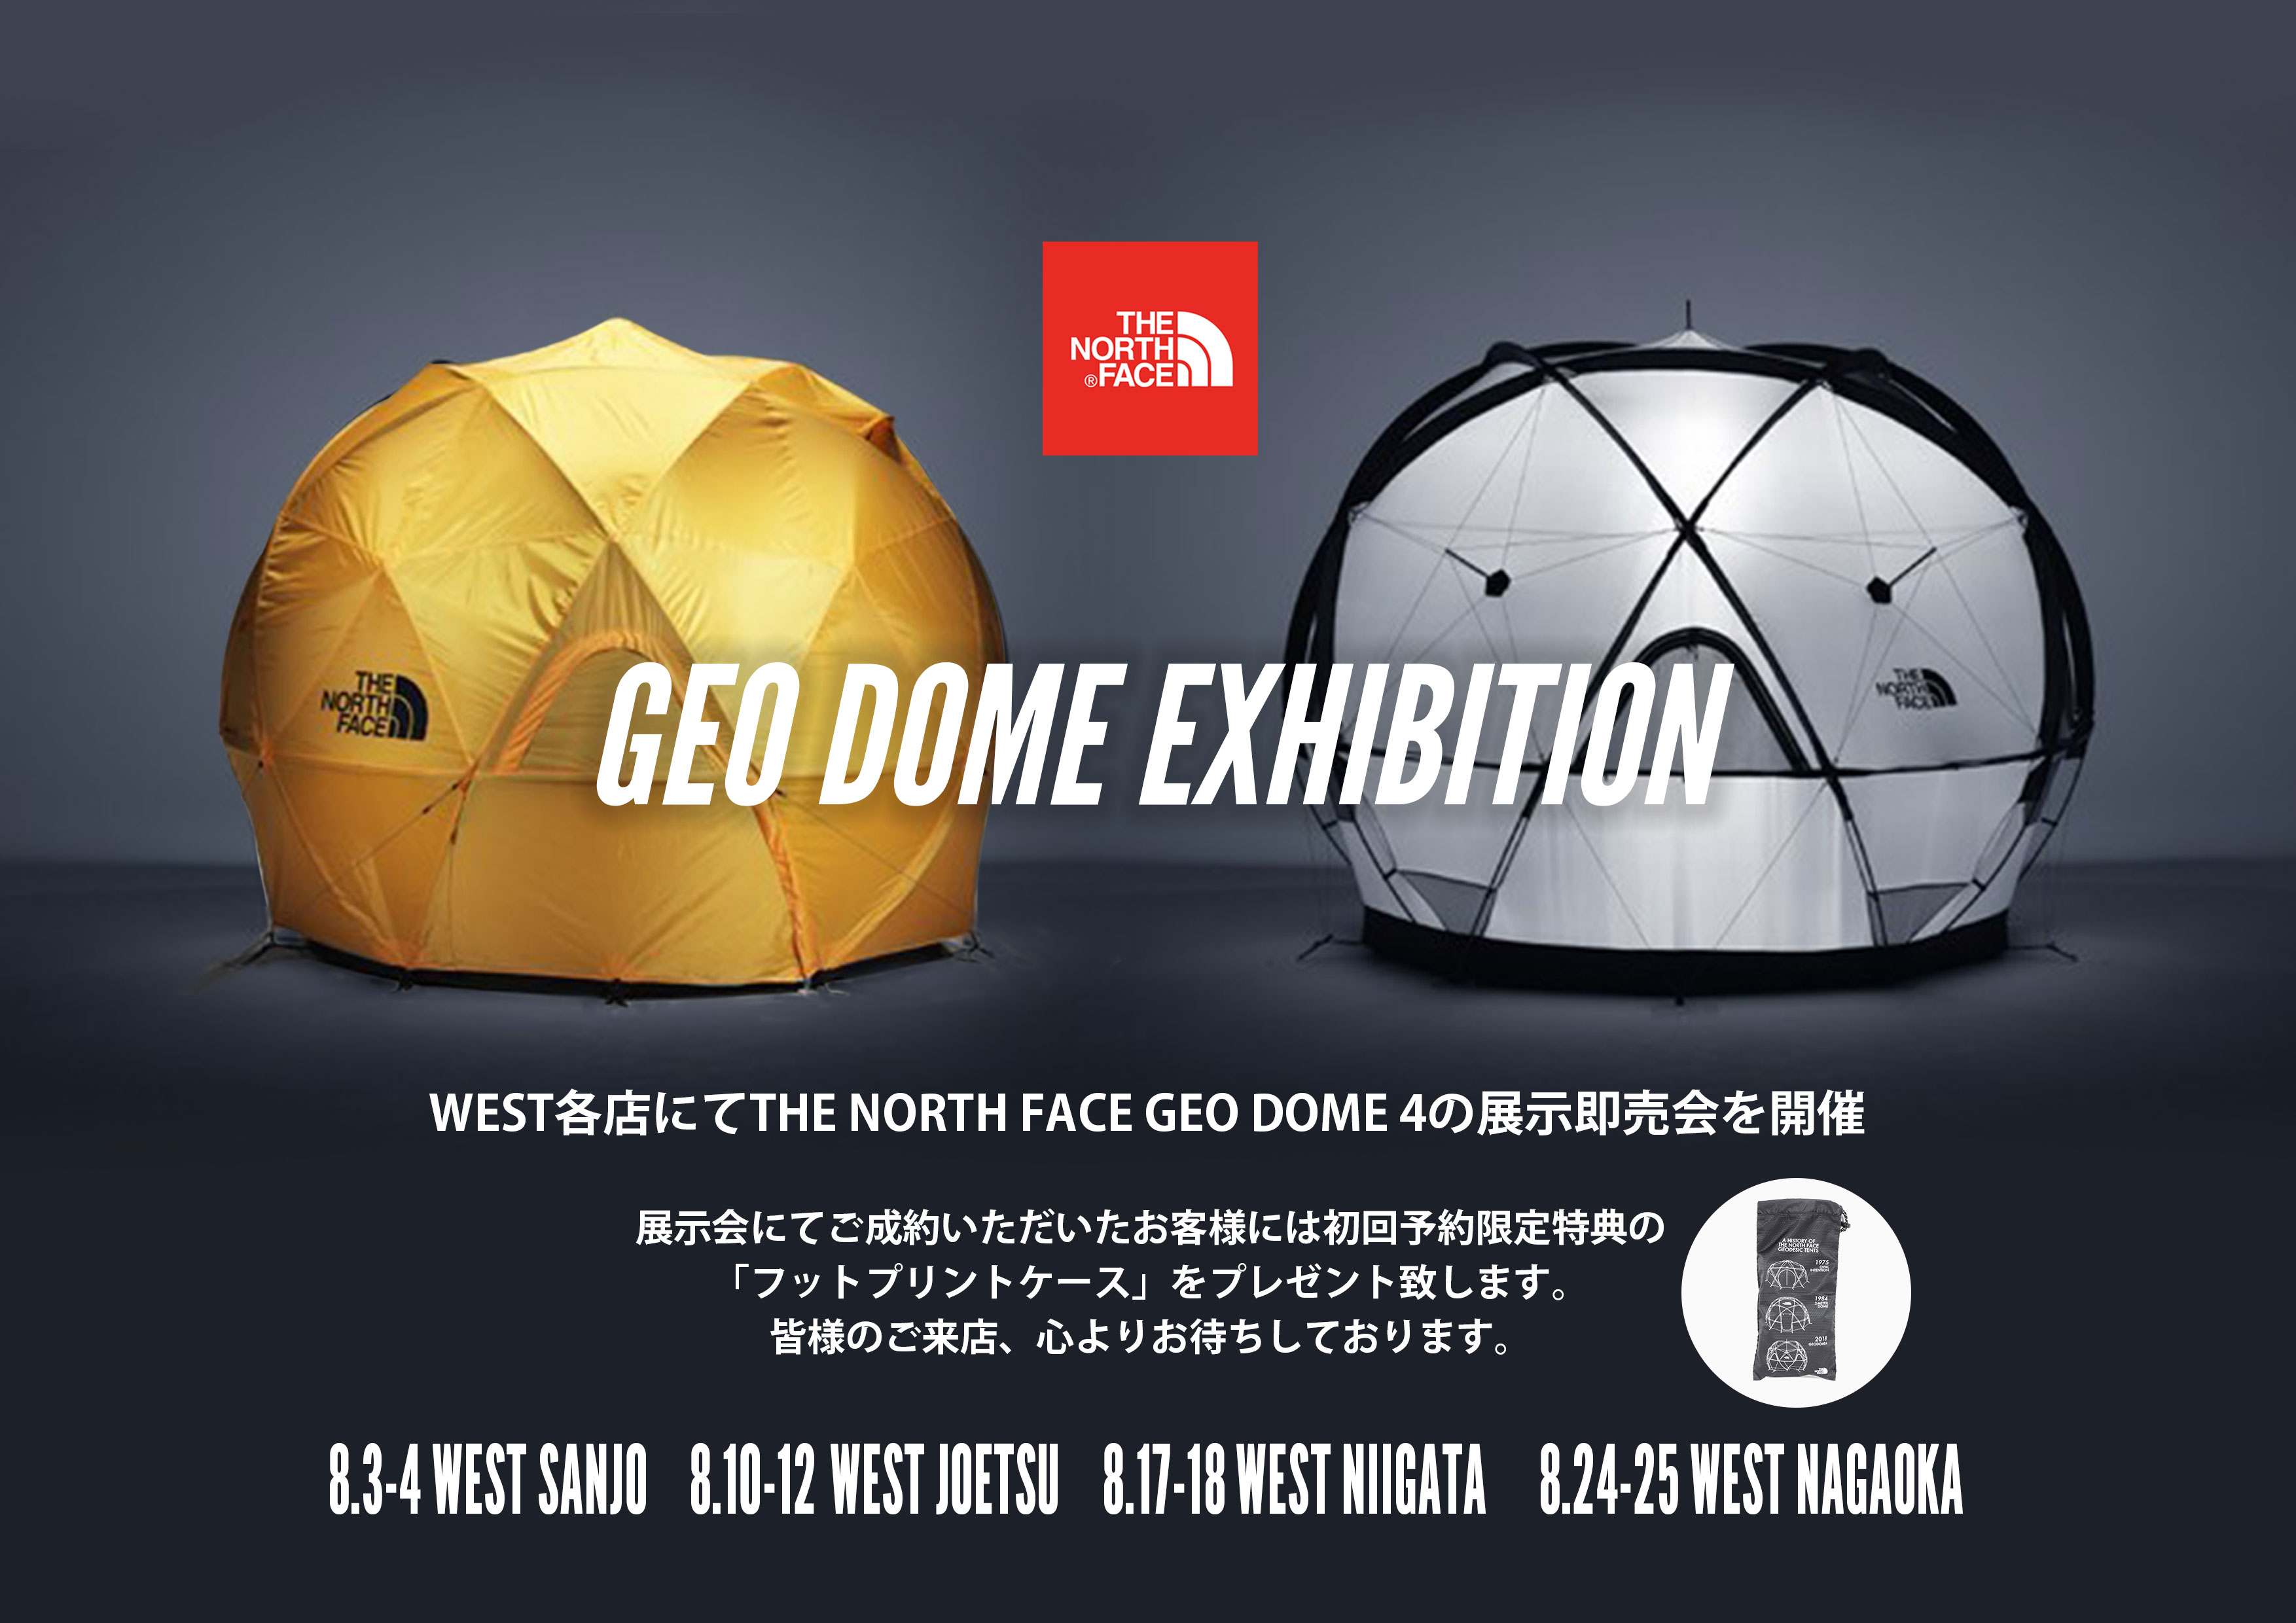 THE NORTH FACE GEO DOME 4 展示即売会開催